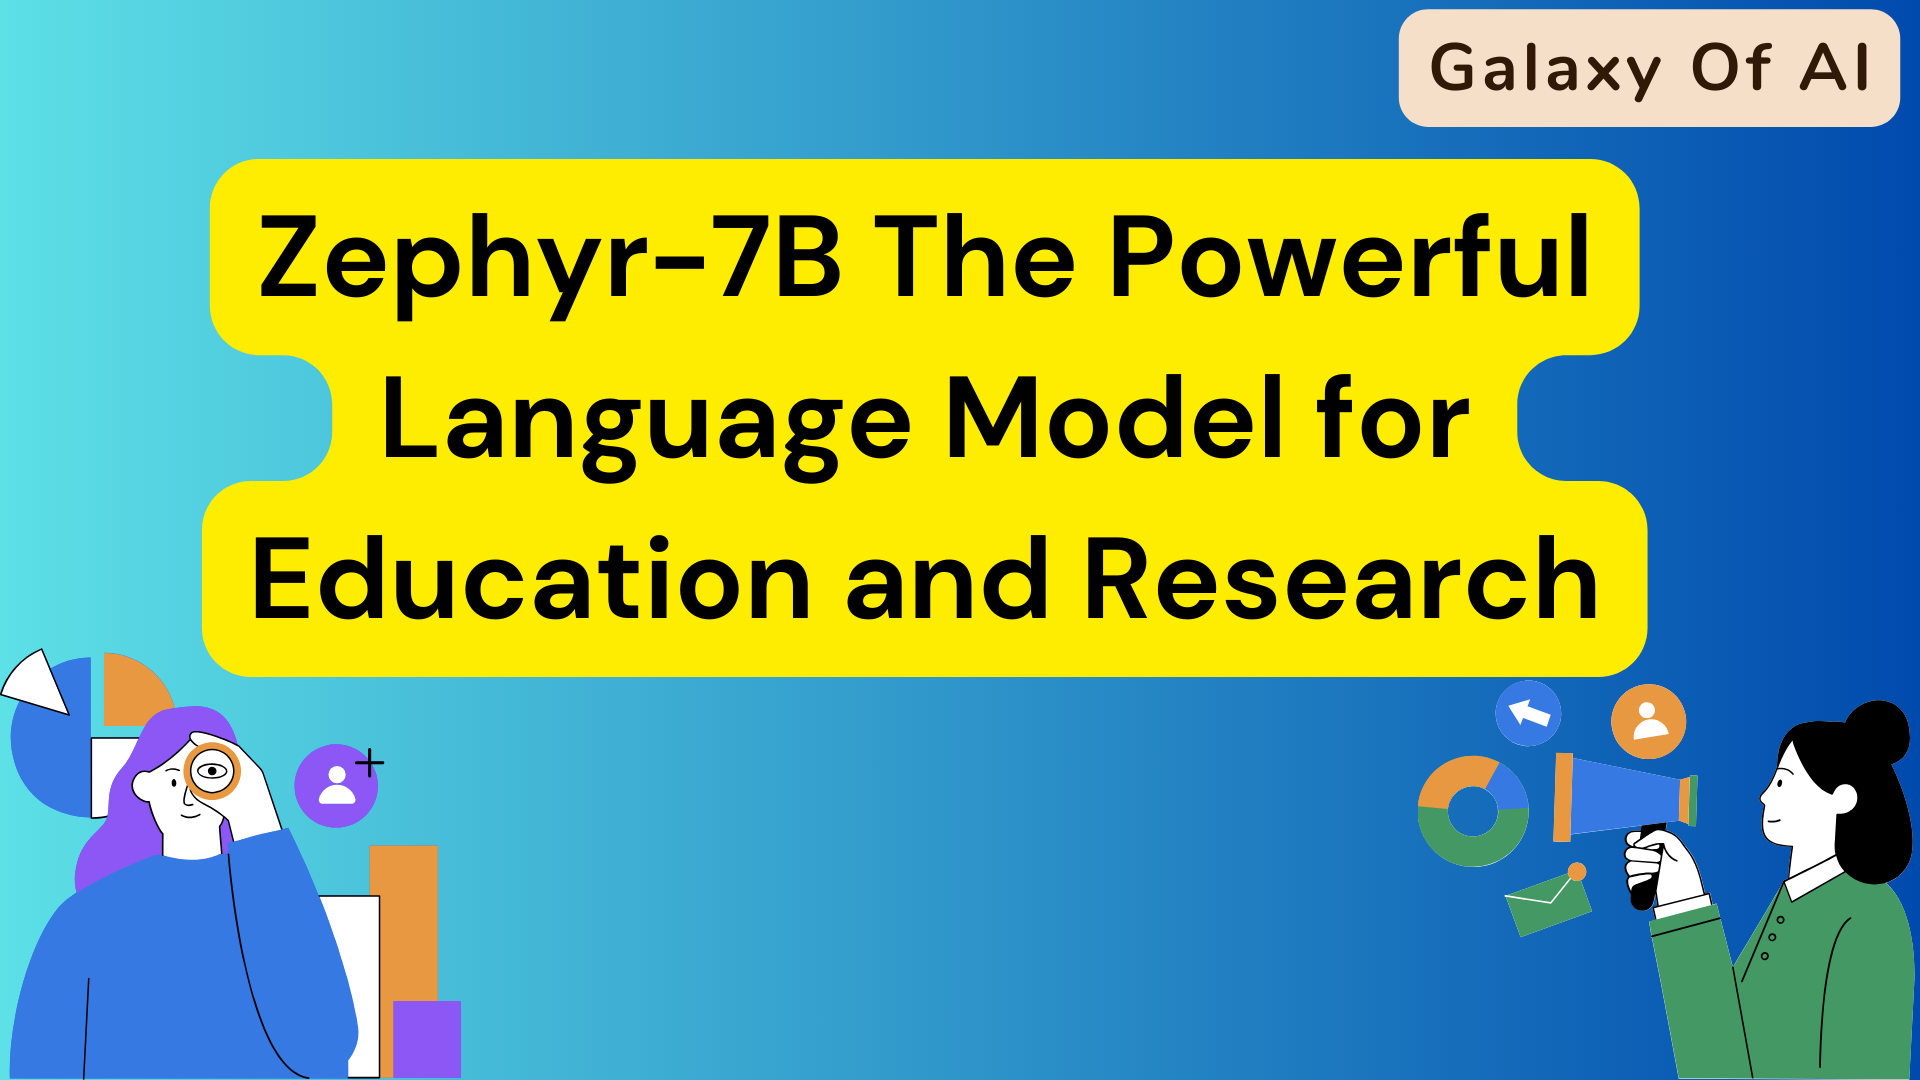 Zephyr-7B The Powerful Language Model for Education and Research